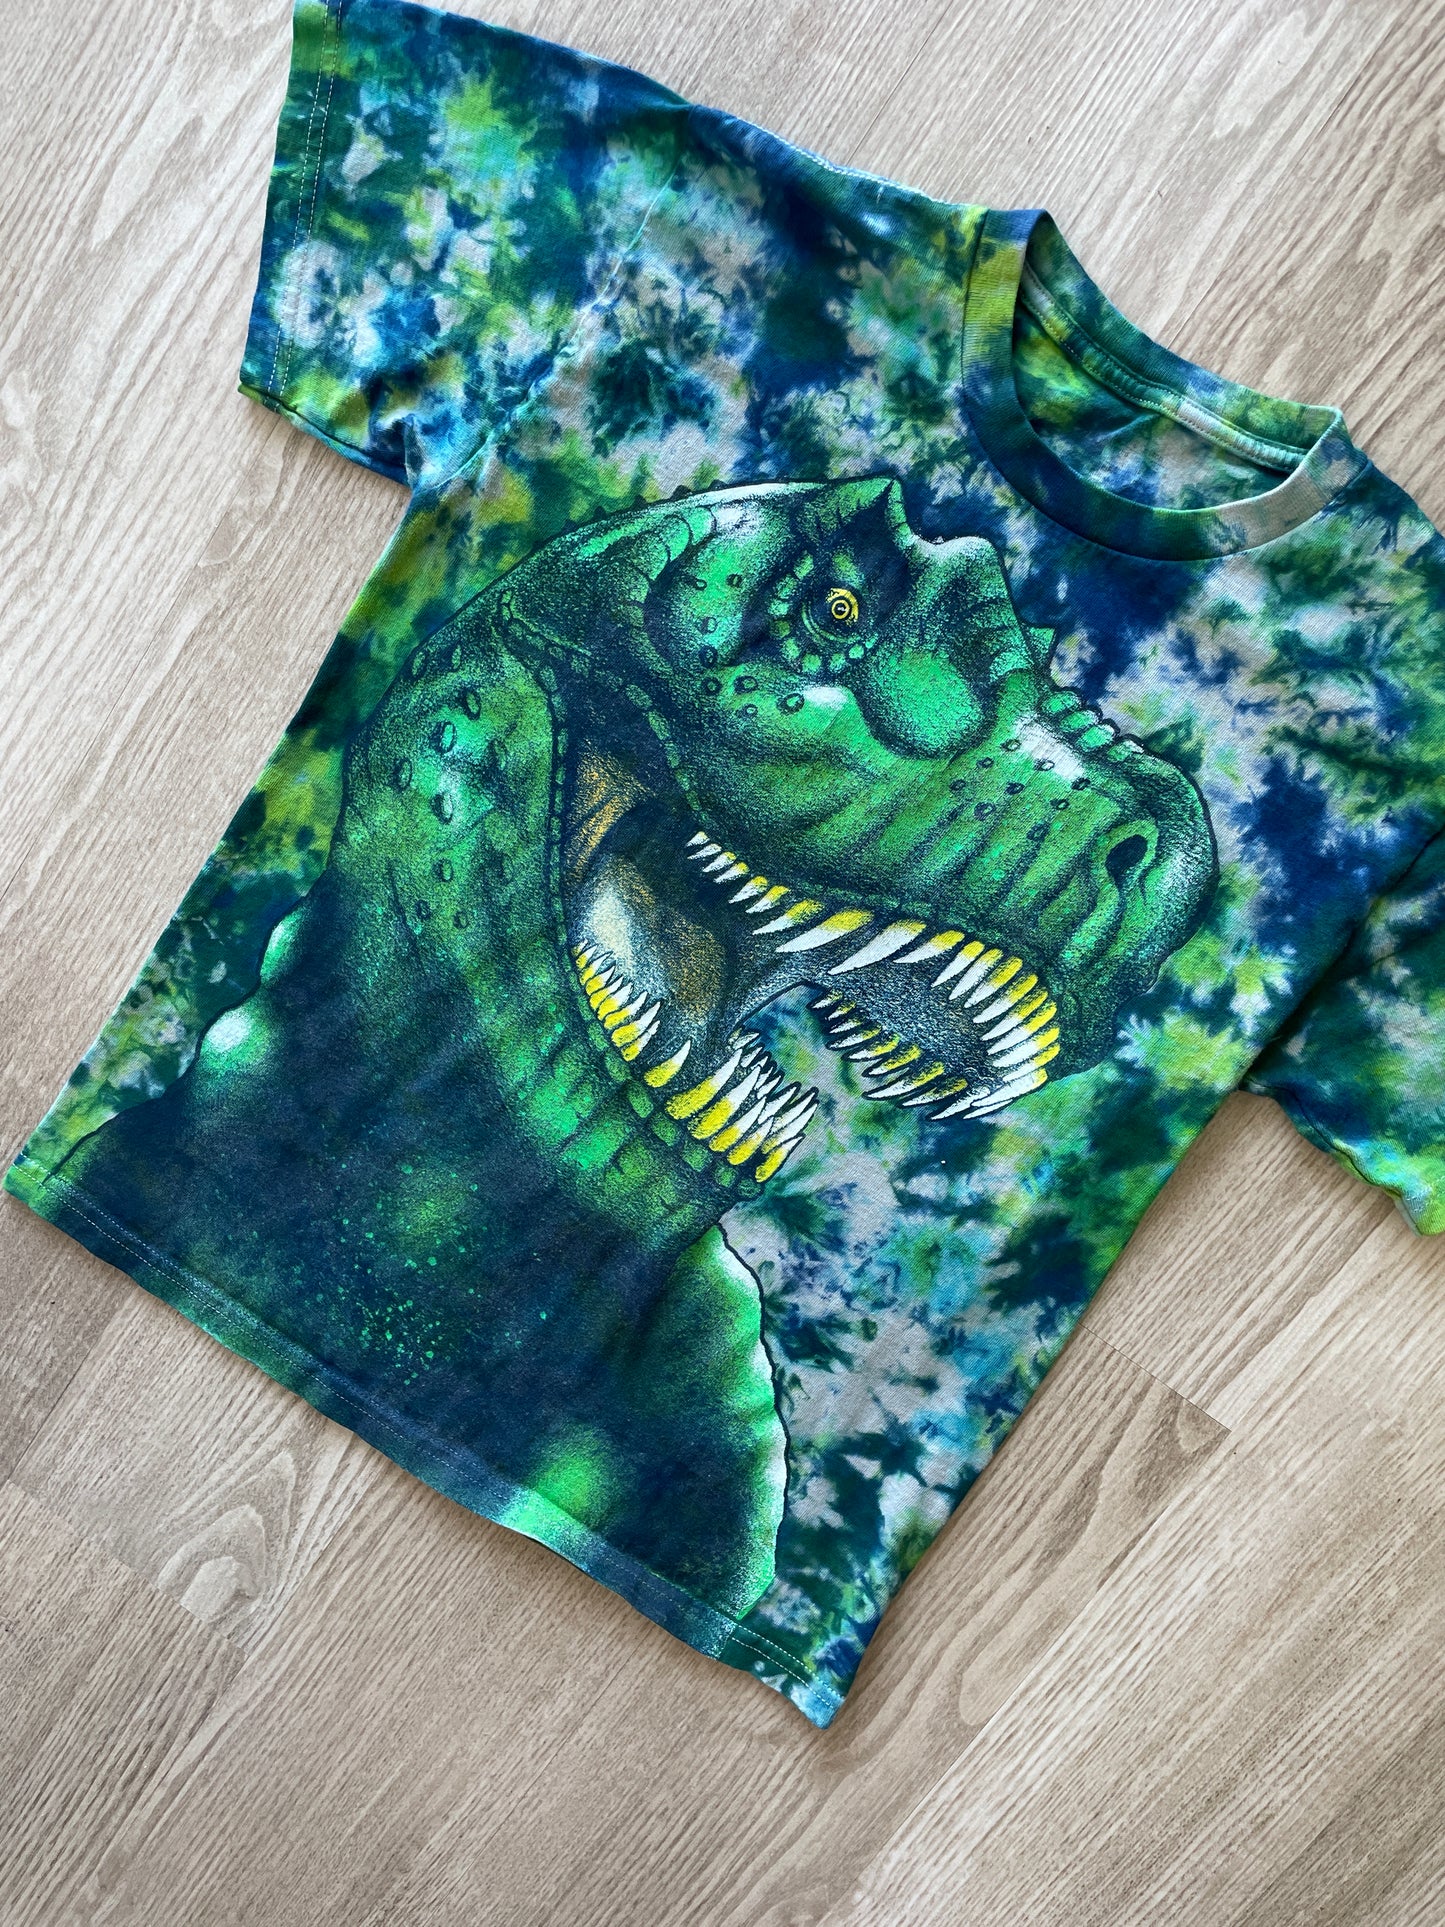 YOUTH LARGE T-REX Handmade Tie Dye T-Shirt | One-Of-a-Kind Green and Blue Short Sleeve